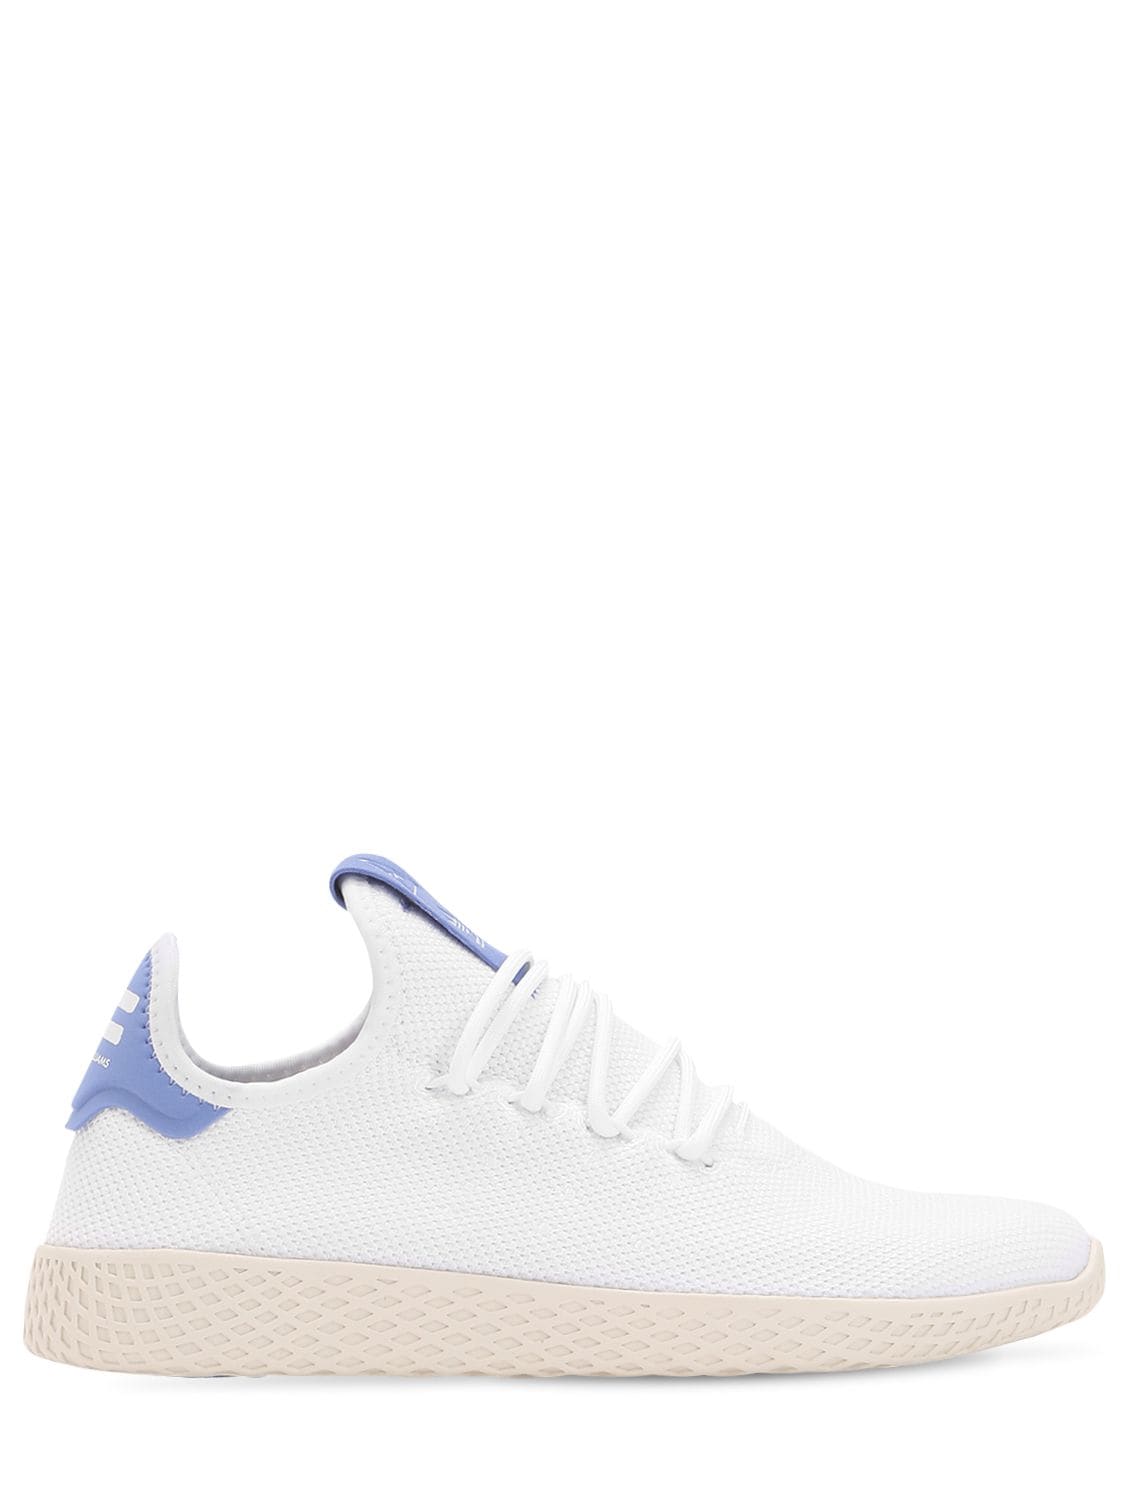 Adidas Originals By Pharrell Williams Pharrell Williams Knit Sneakers In White,purple